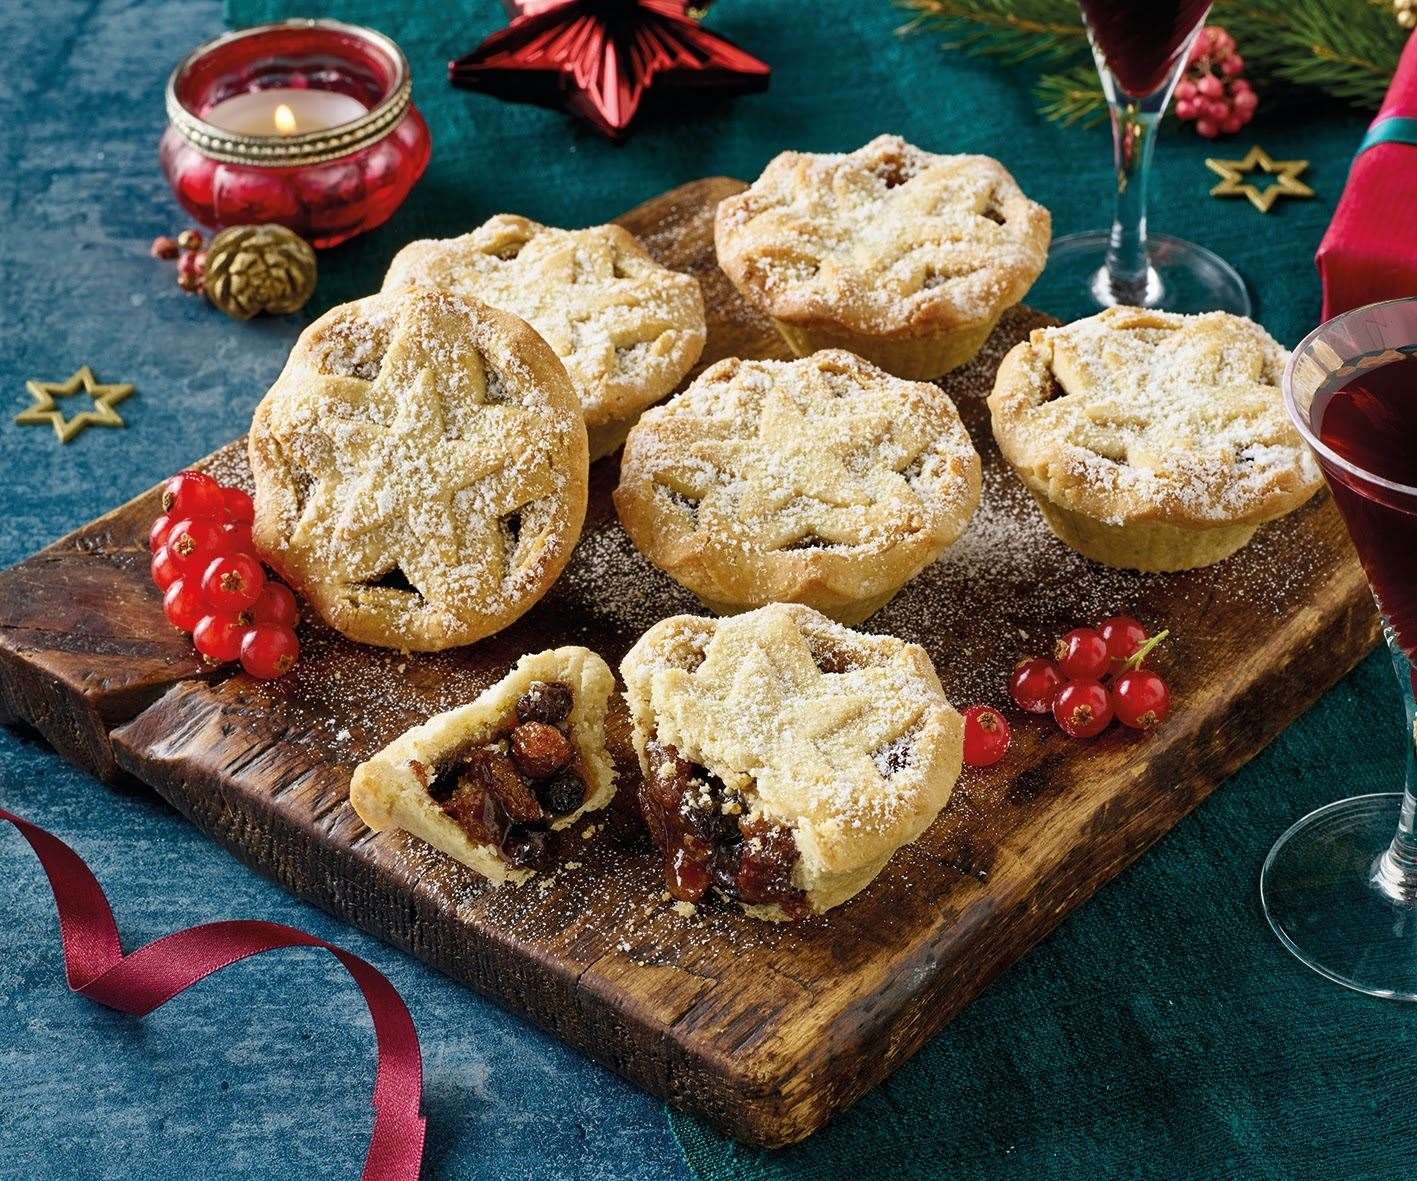 Mince pies from Morrison's have been crowned best supermarket pies by Good Housekeeping